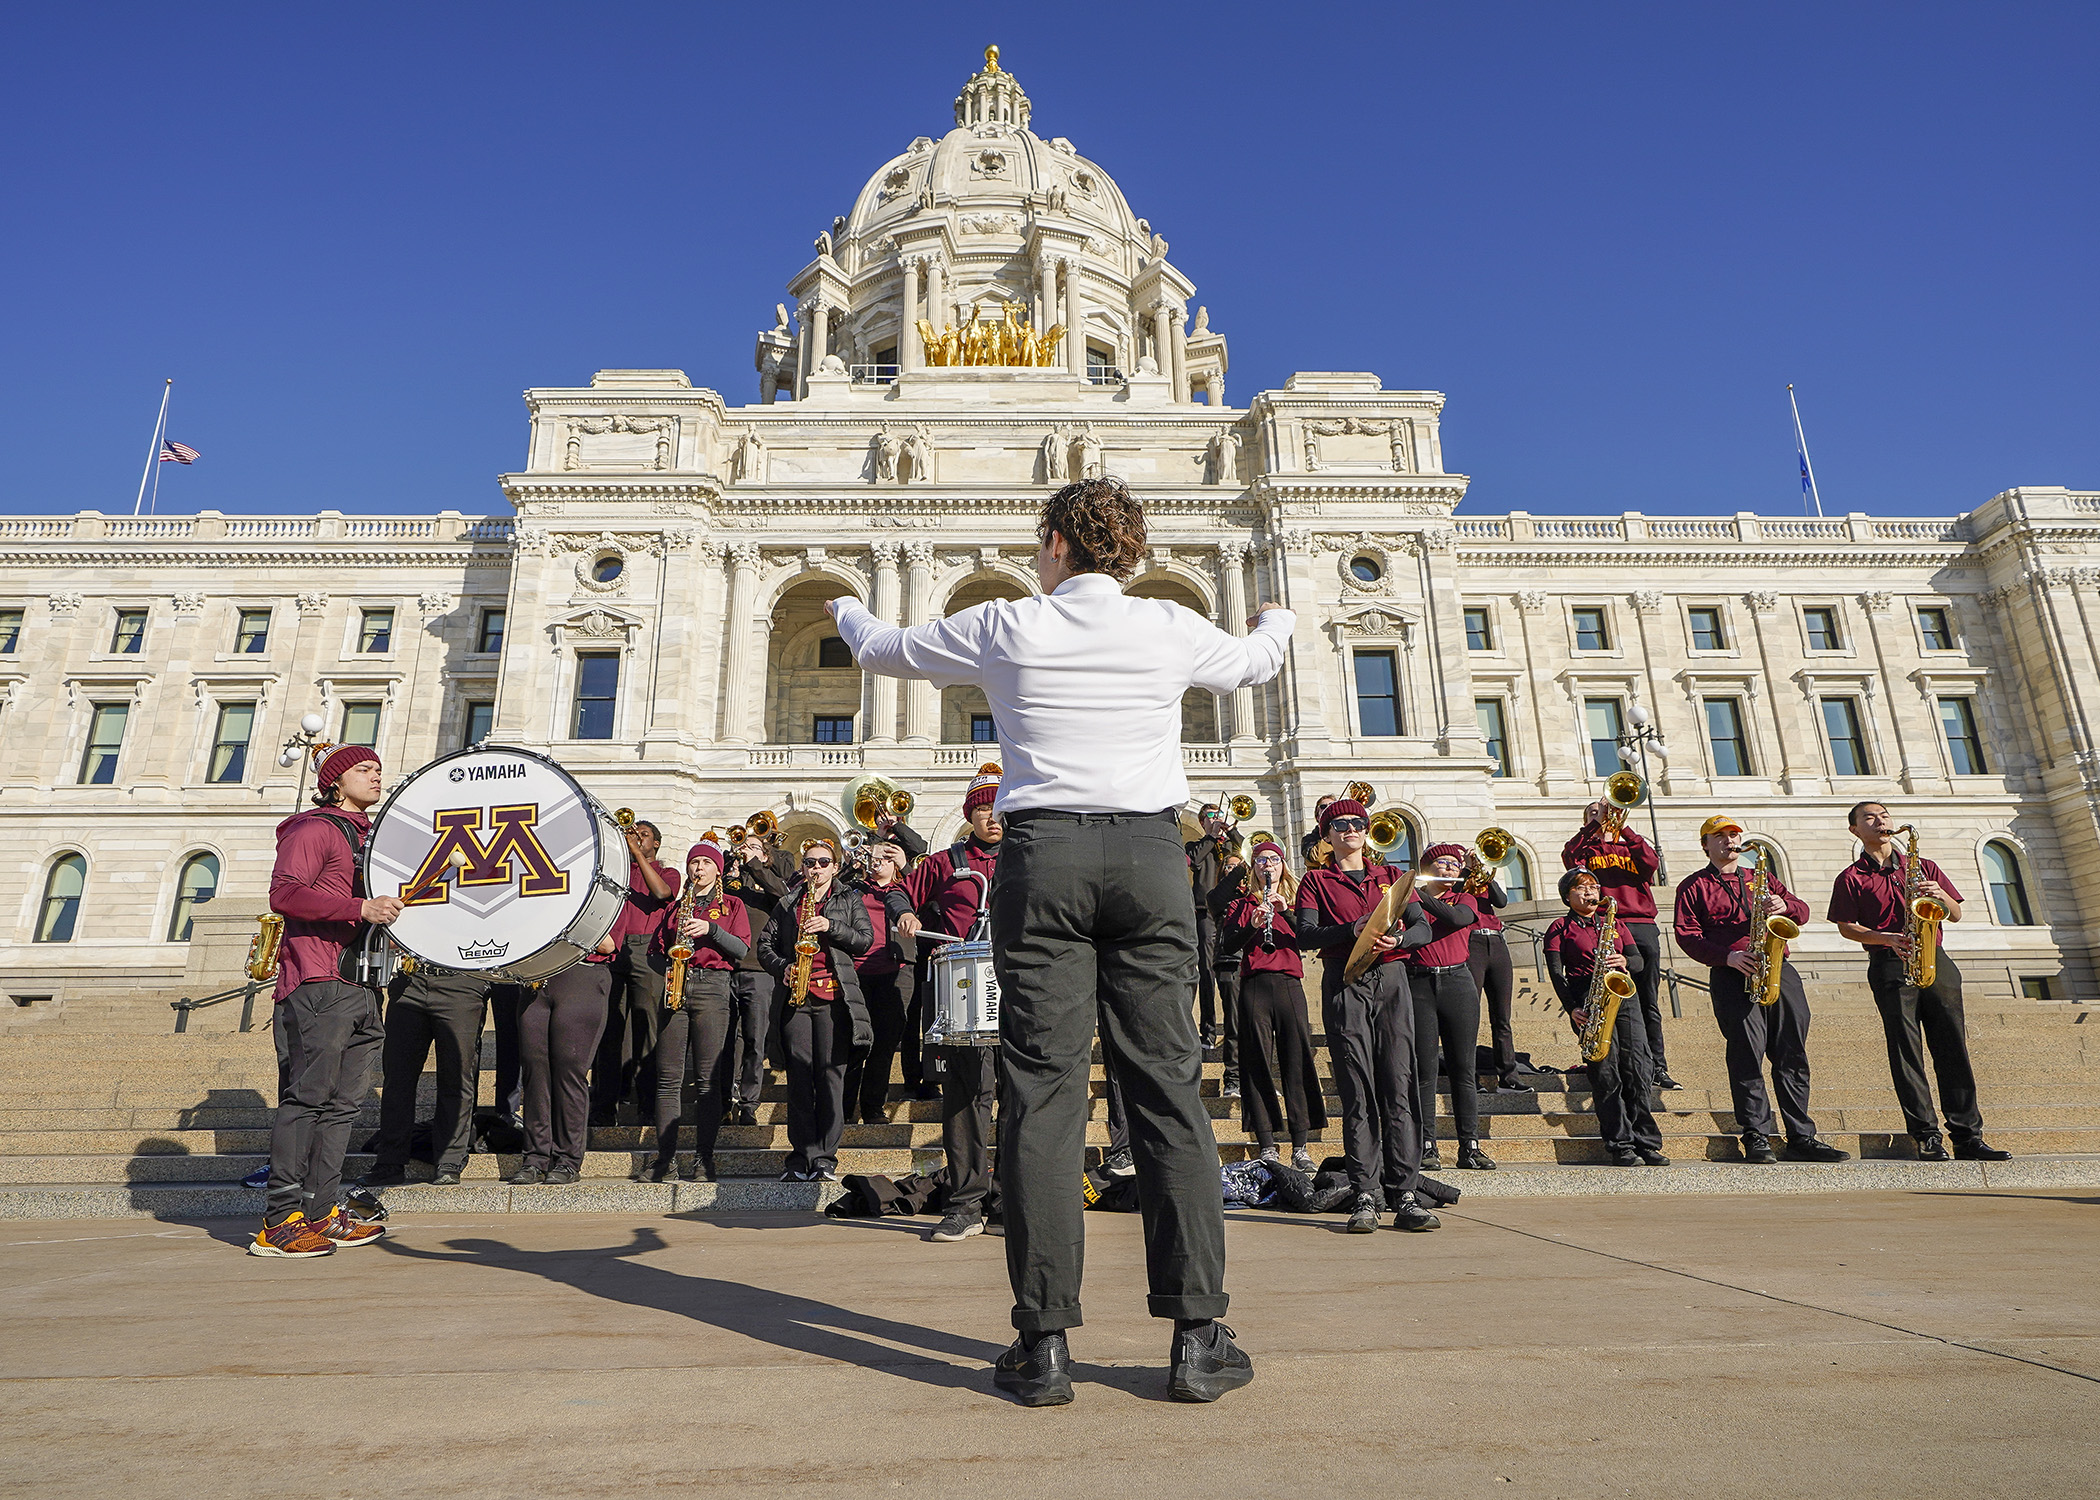 Drum Major Ari Martin conducts a University of Minnesota pep band Feb. 22 as part of “U of M Day at the Capitol” events. (Photo by Andrew VonBank)